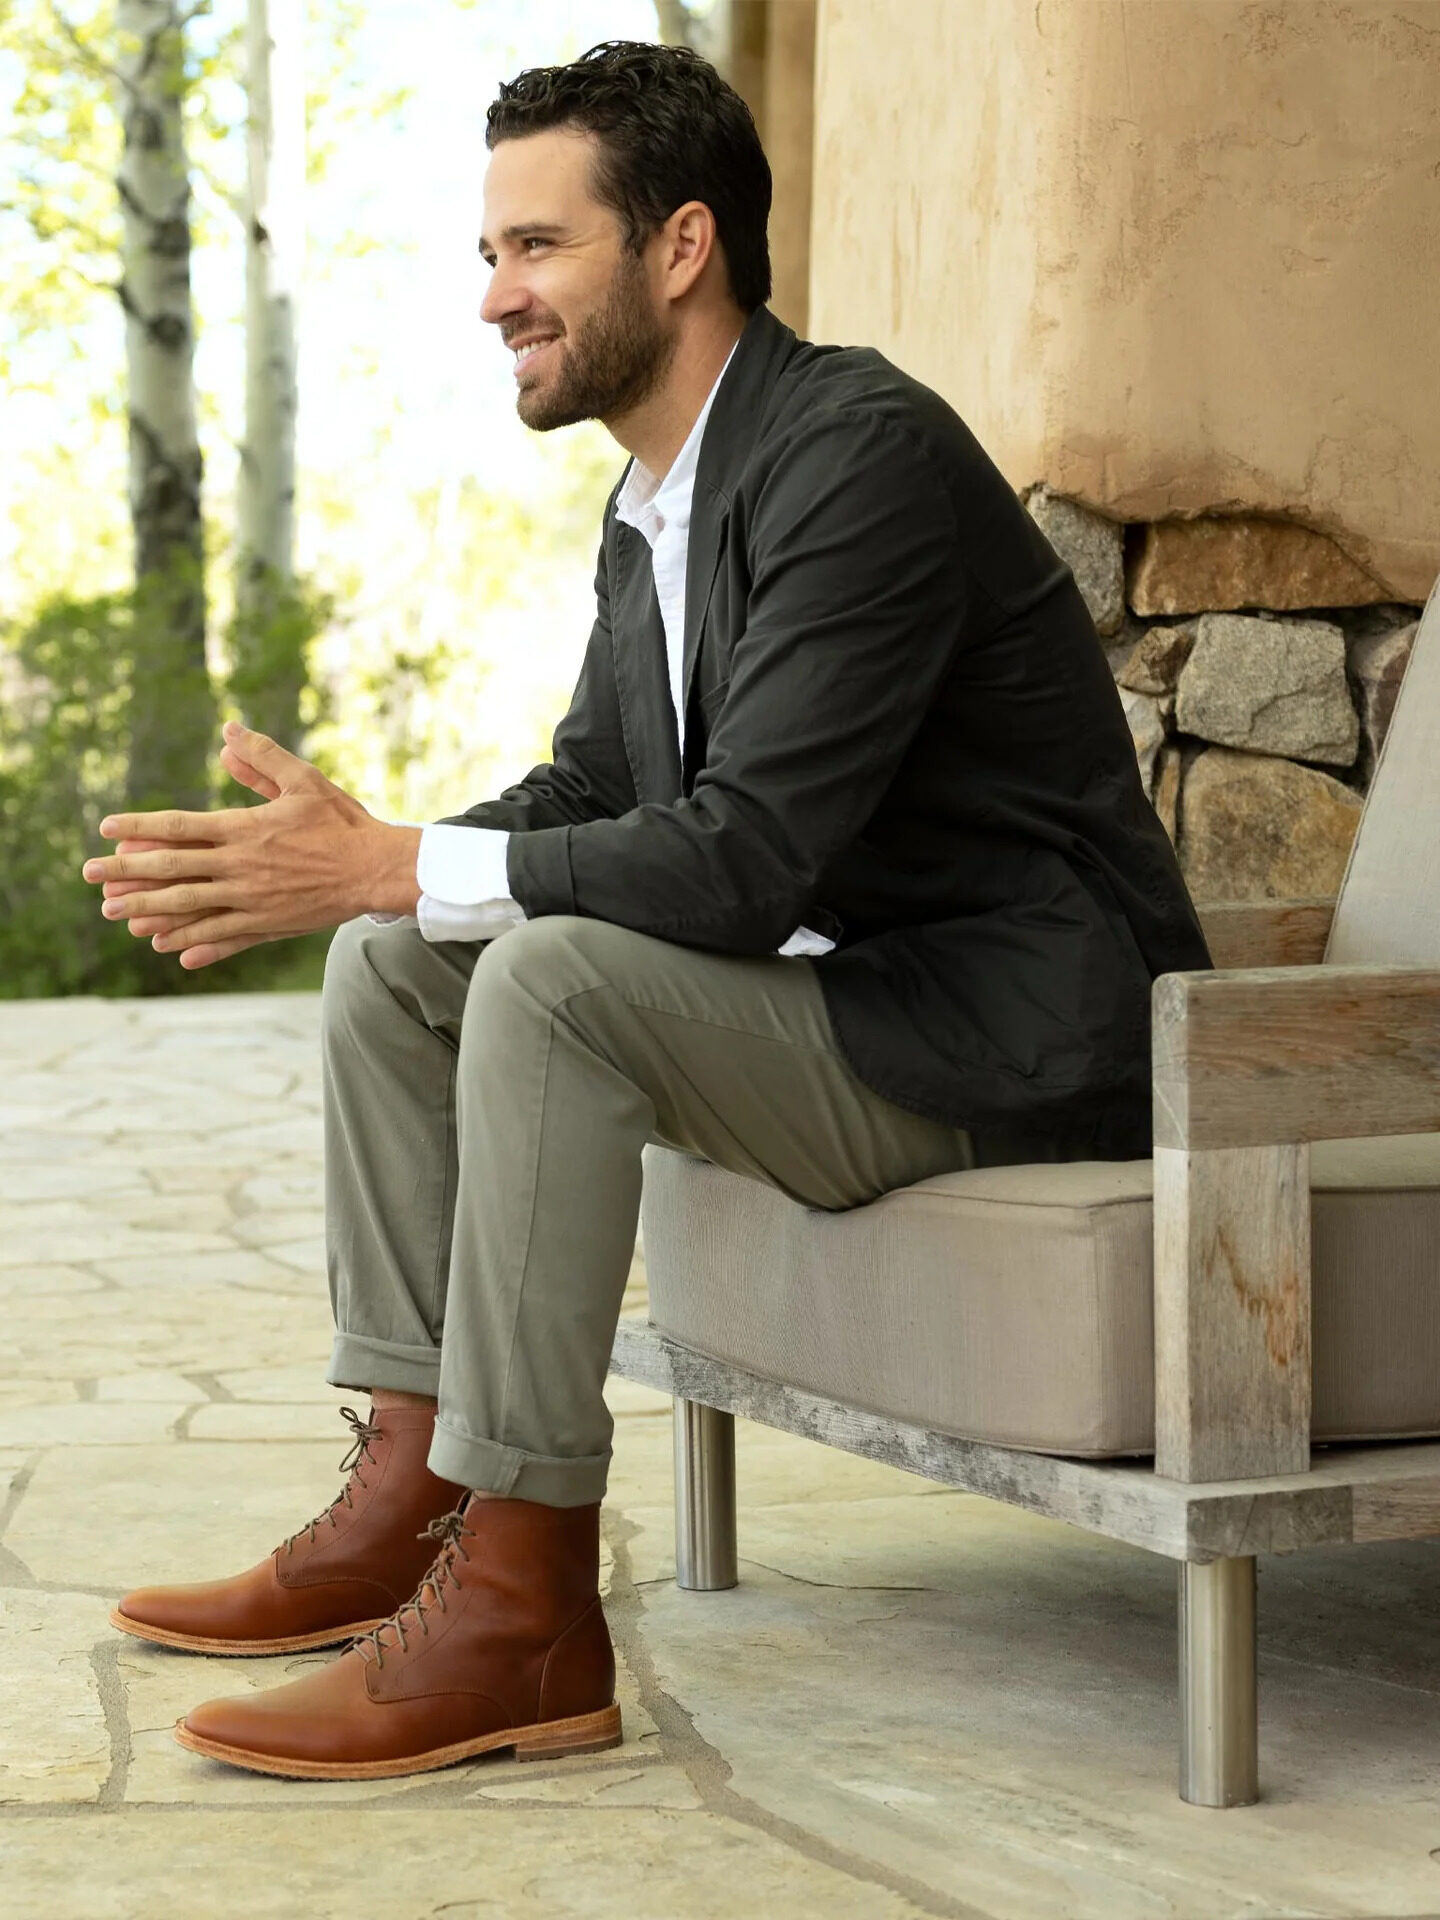 A model sitting on an outdoor chair wearing brown Nisolo boots.